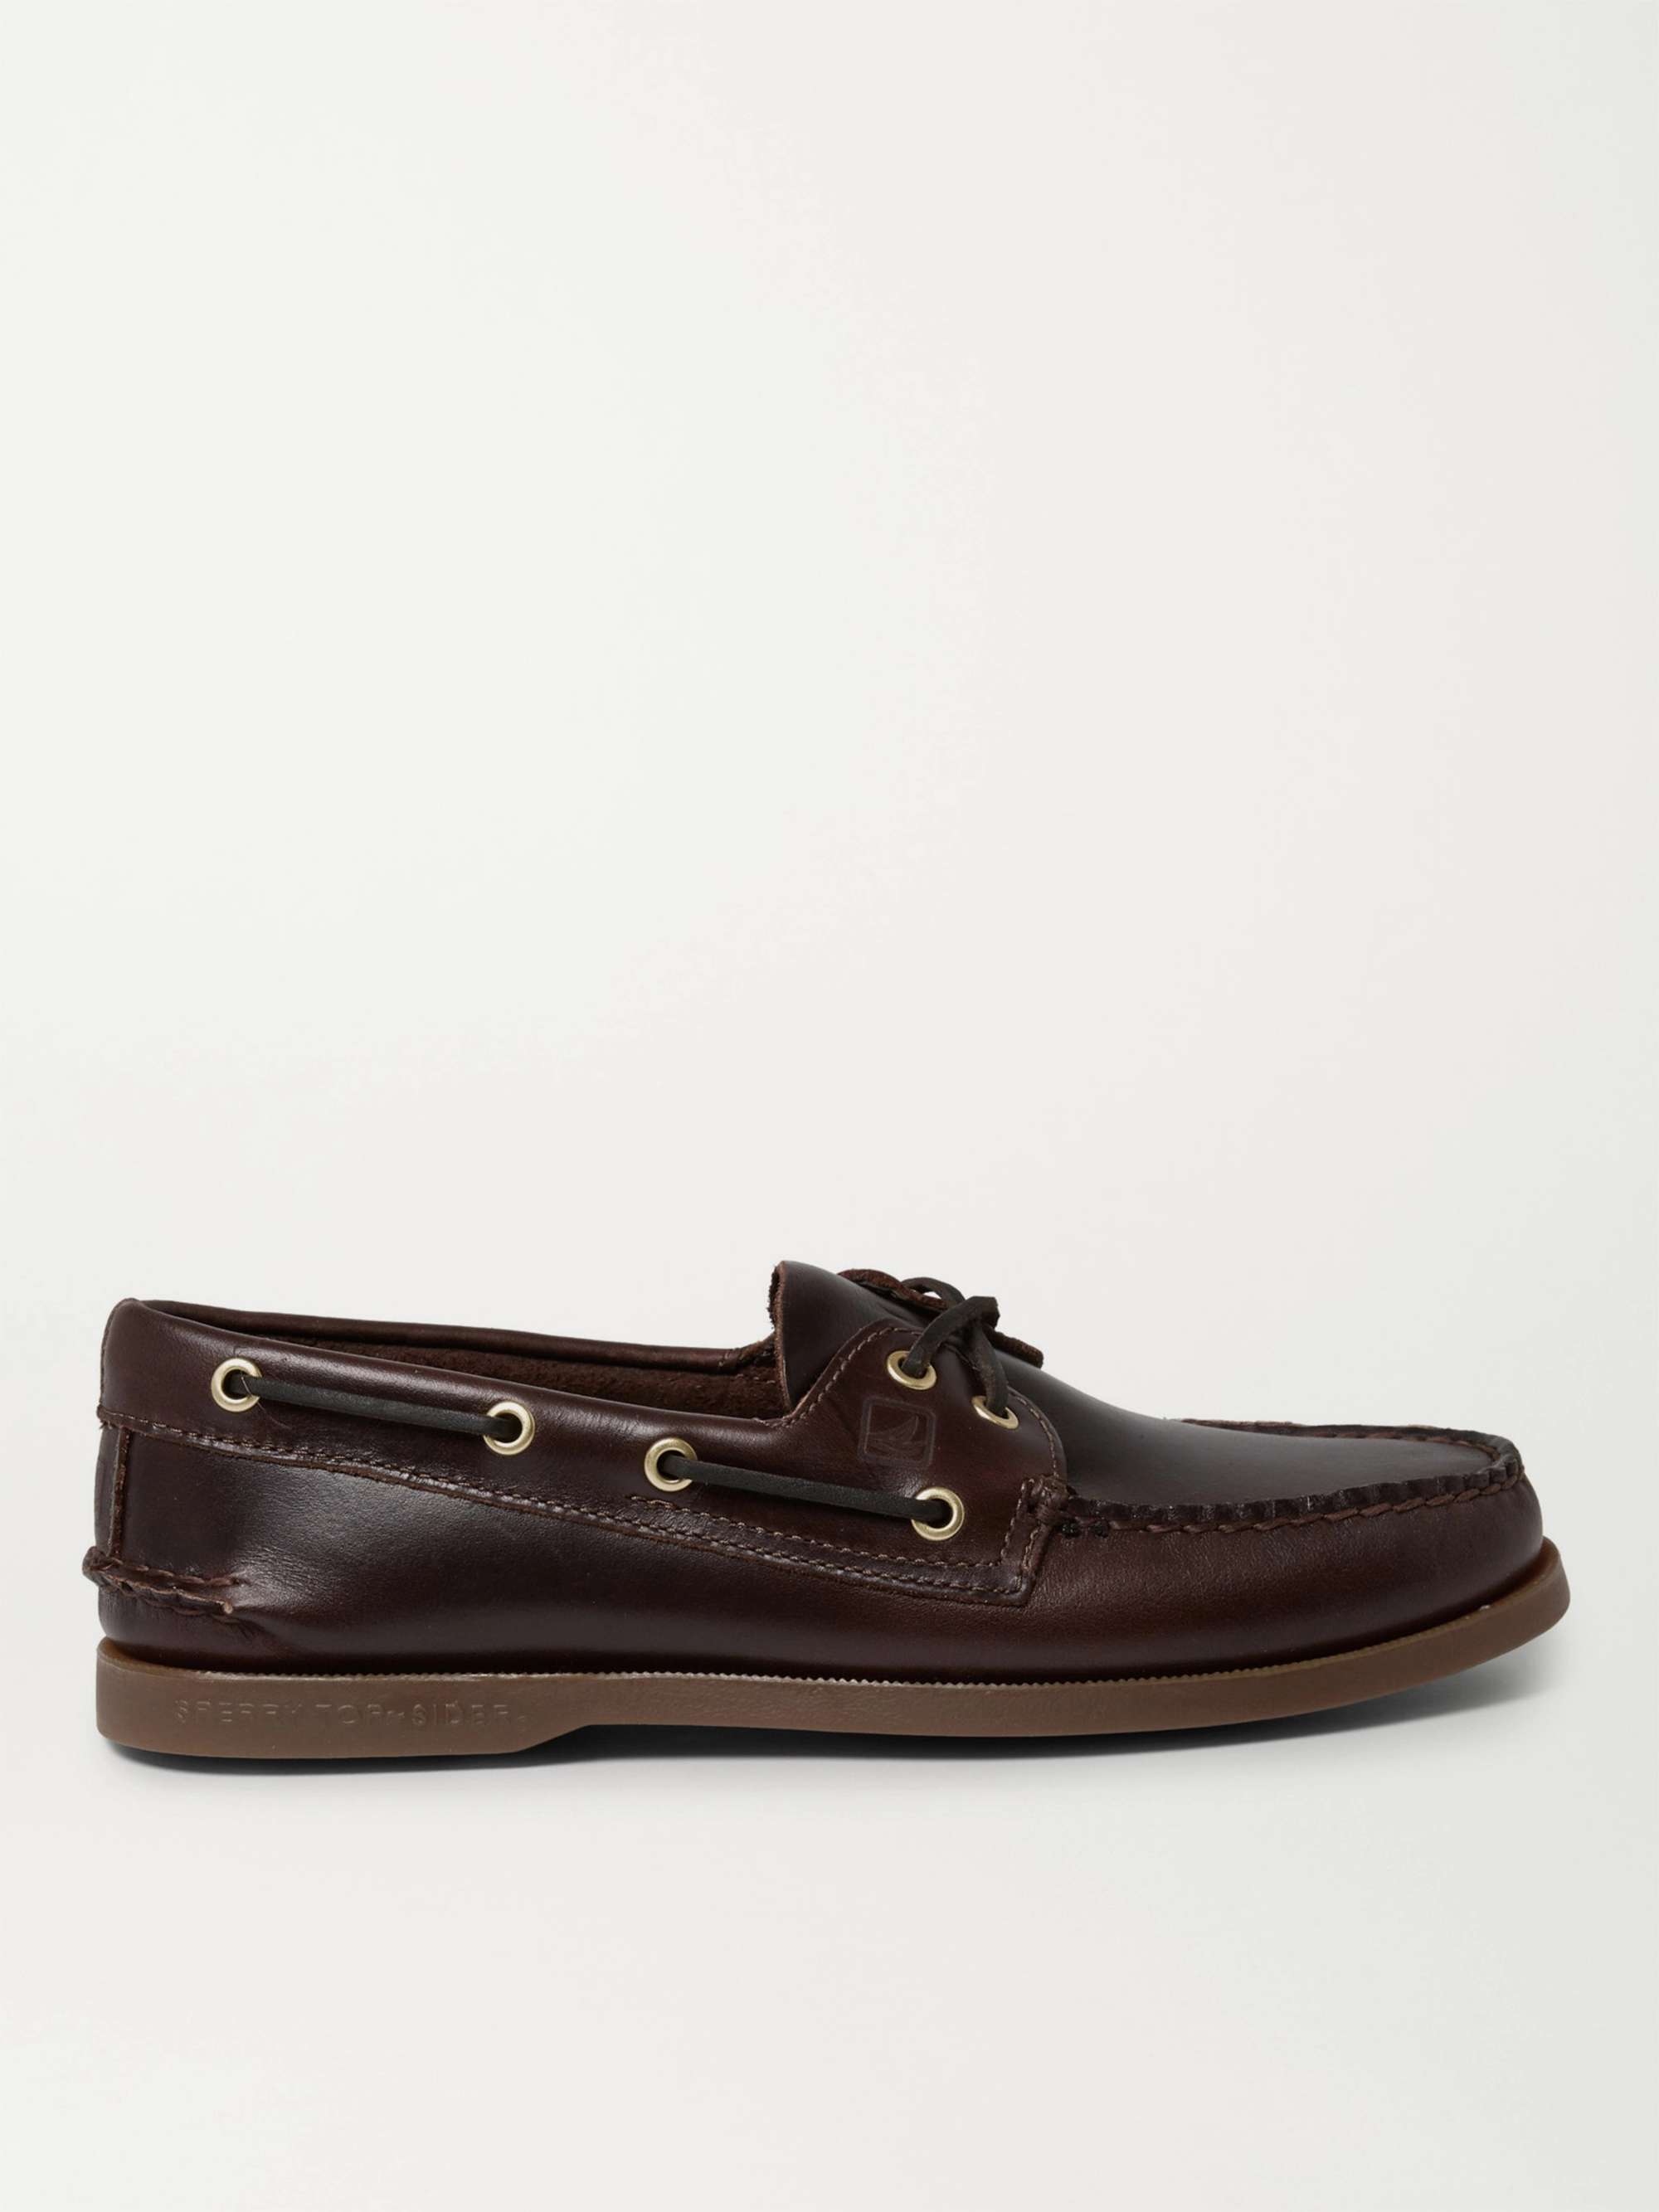 SPERRY Authentic Original Burnished-Leather Boat Shoes for Men | MR PORTER